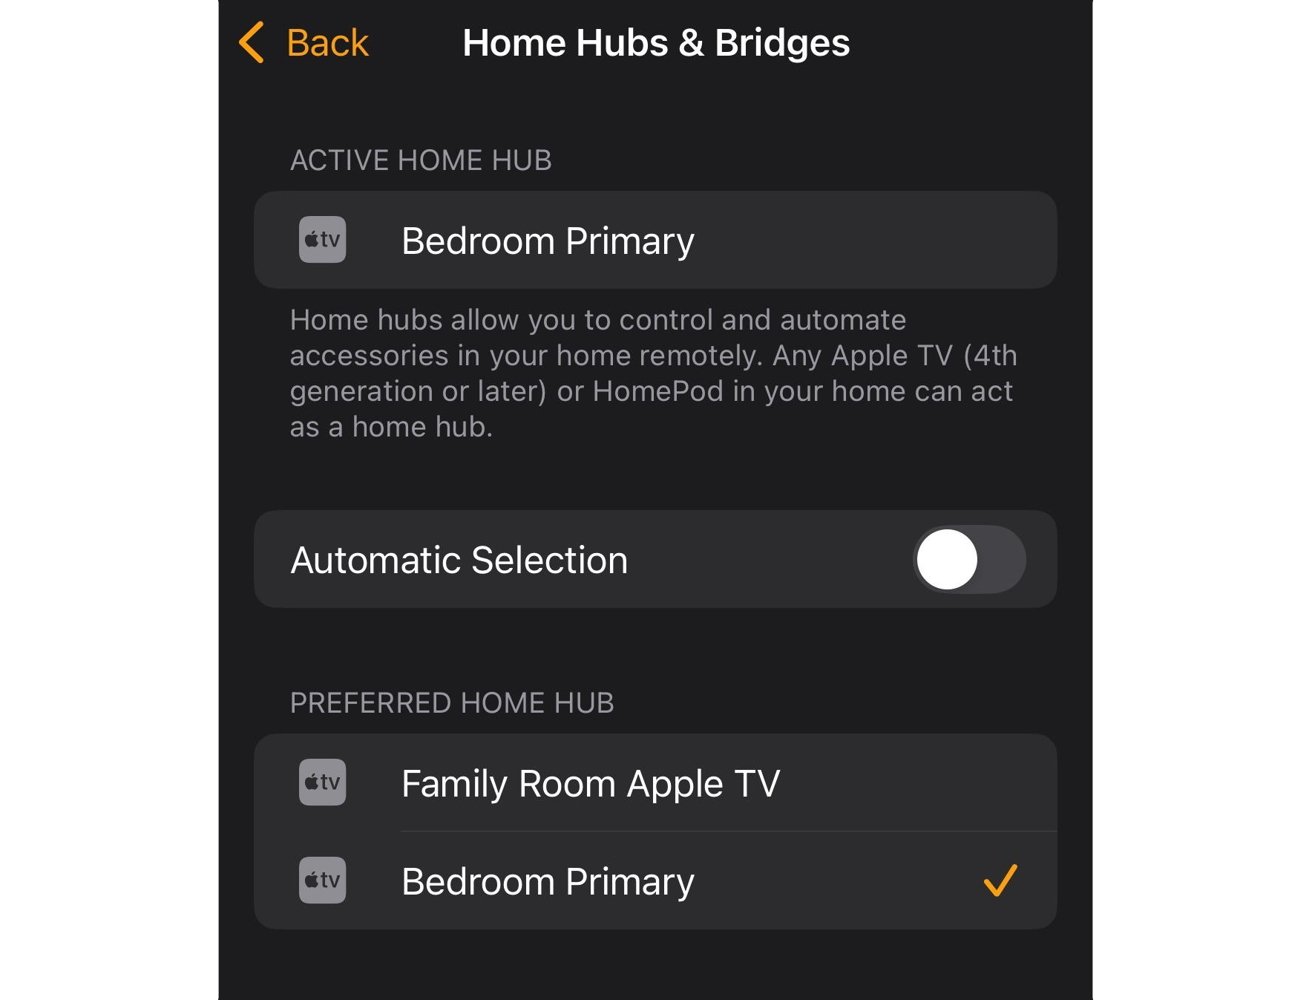 Home Hubs & Bridges screen showing Bedroom Primary as active home hub, with automatic selection toggle off. Preferred hub options: Family Room Apple TV, Bedroom Primary (checked).